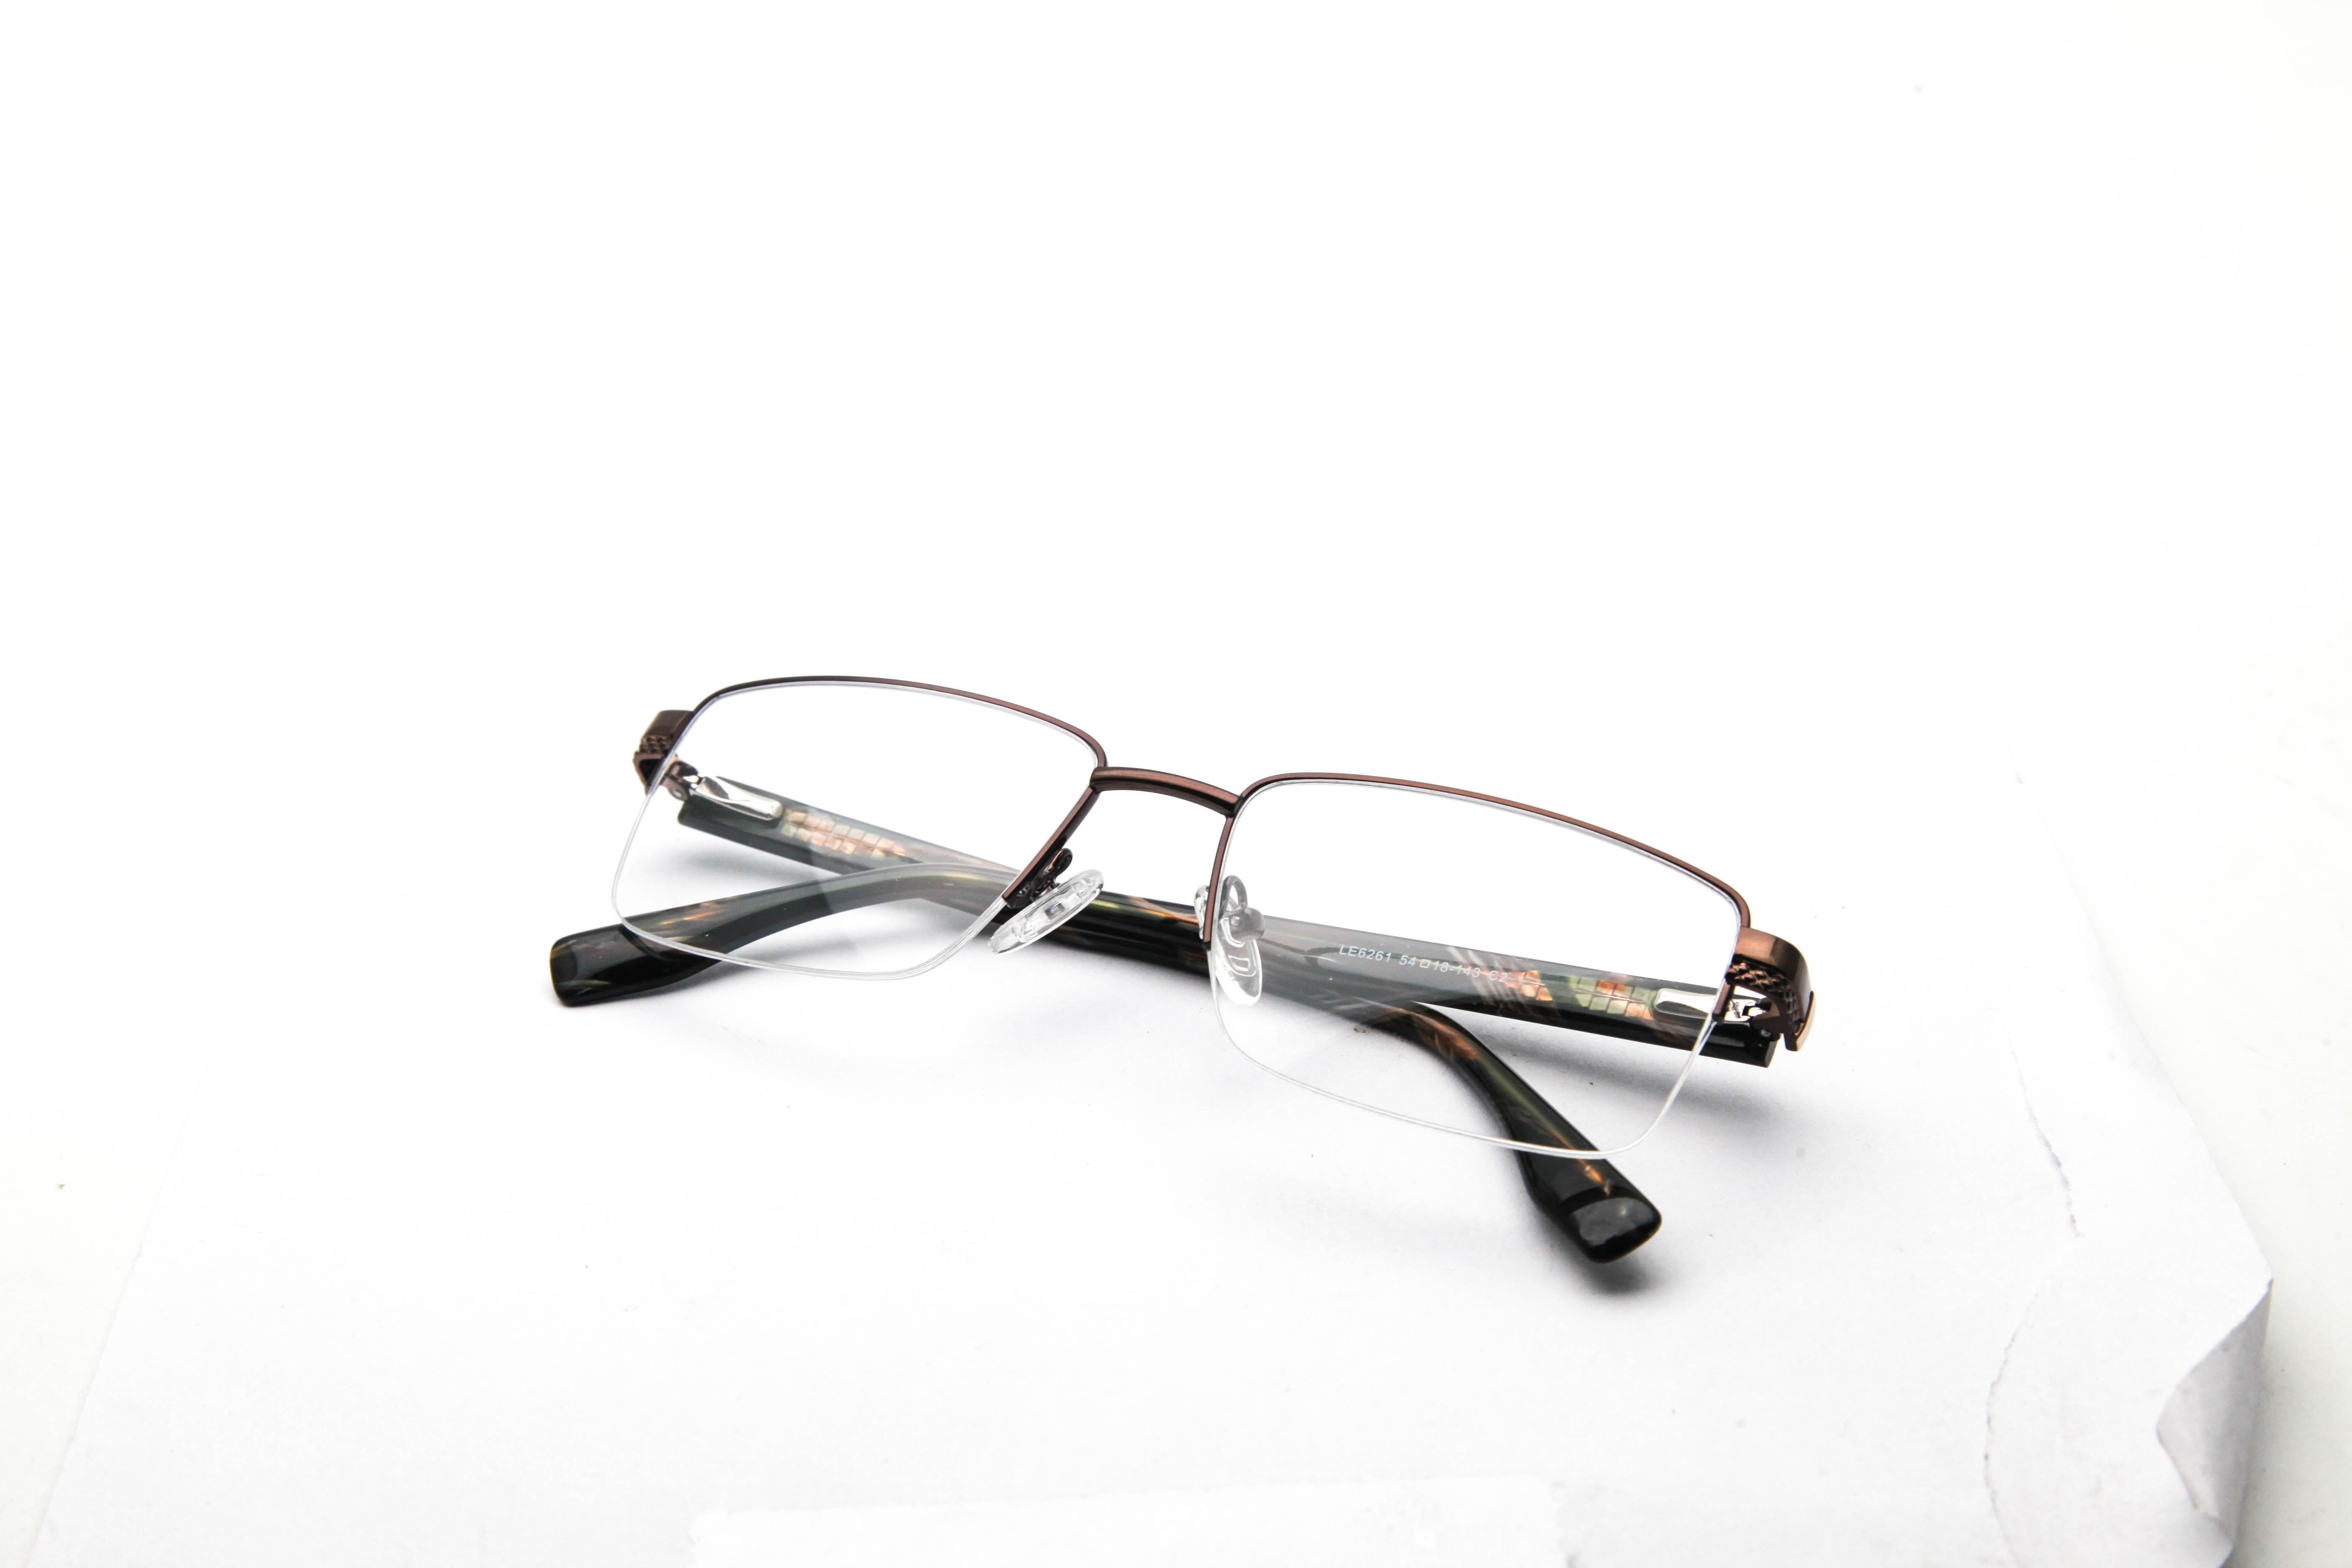 GUANDE GLASSES, a leading eyewear company, is proud to present its latest collection of metal glasses